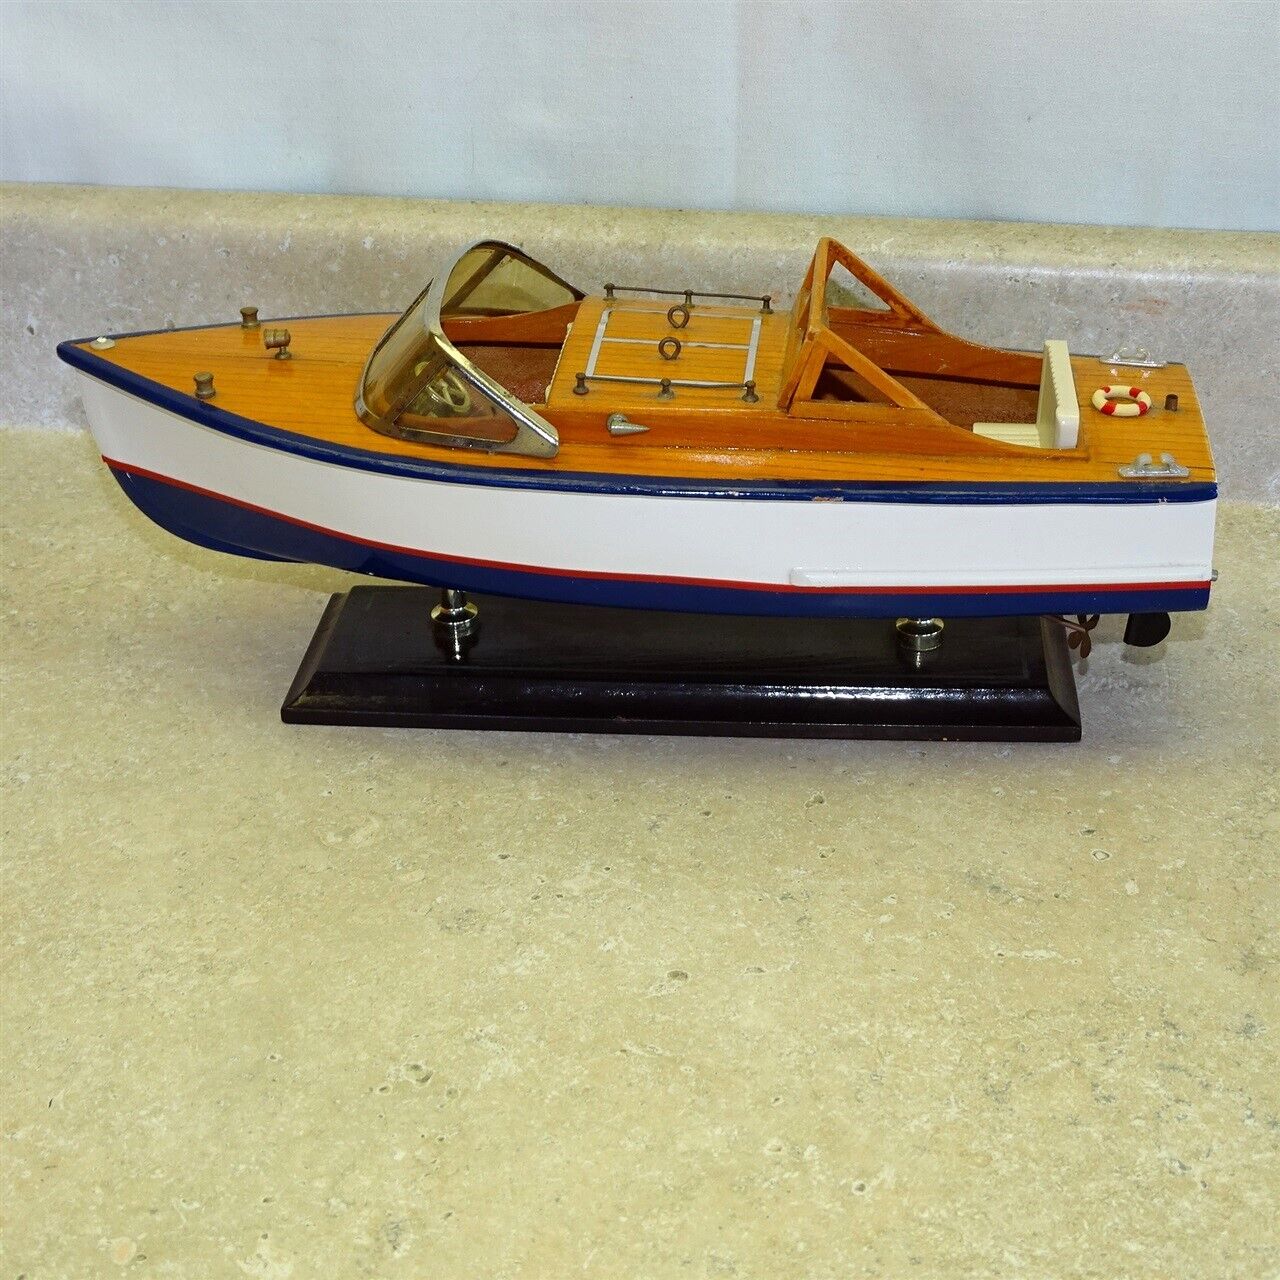 Vintage Chris Craft Wooden Boat On Stand, Model Kit, Display, Runabout Speed